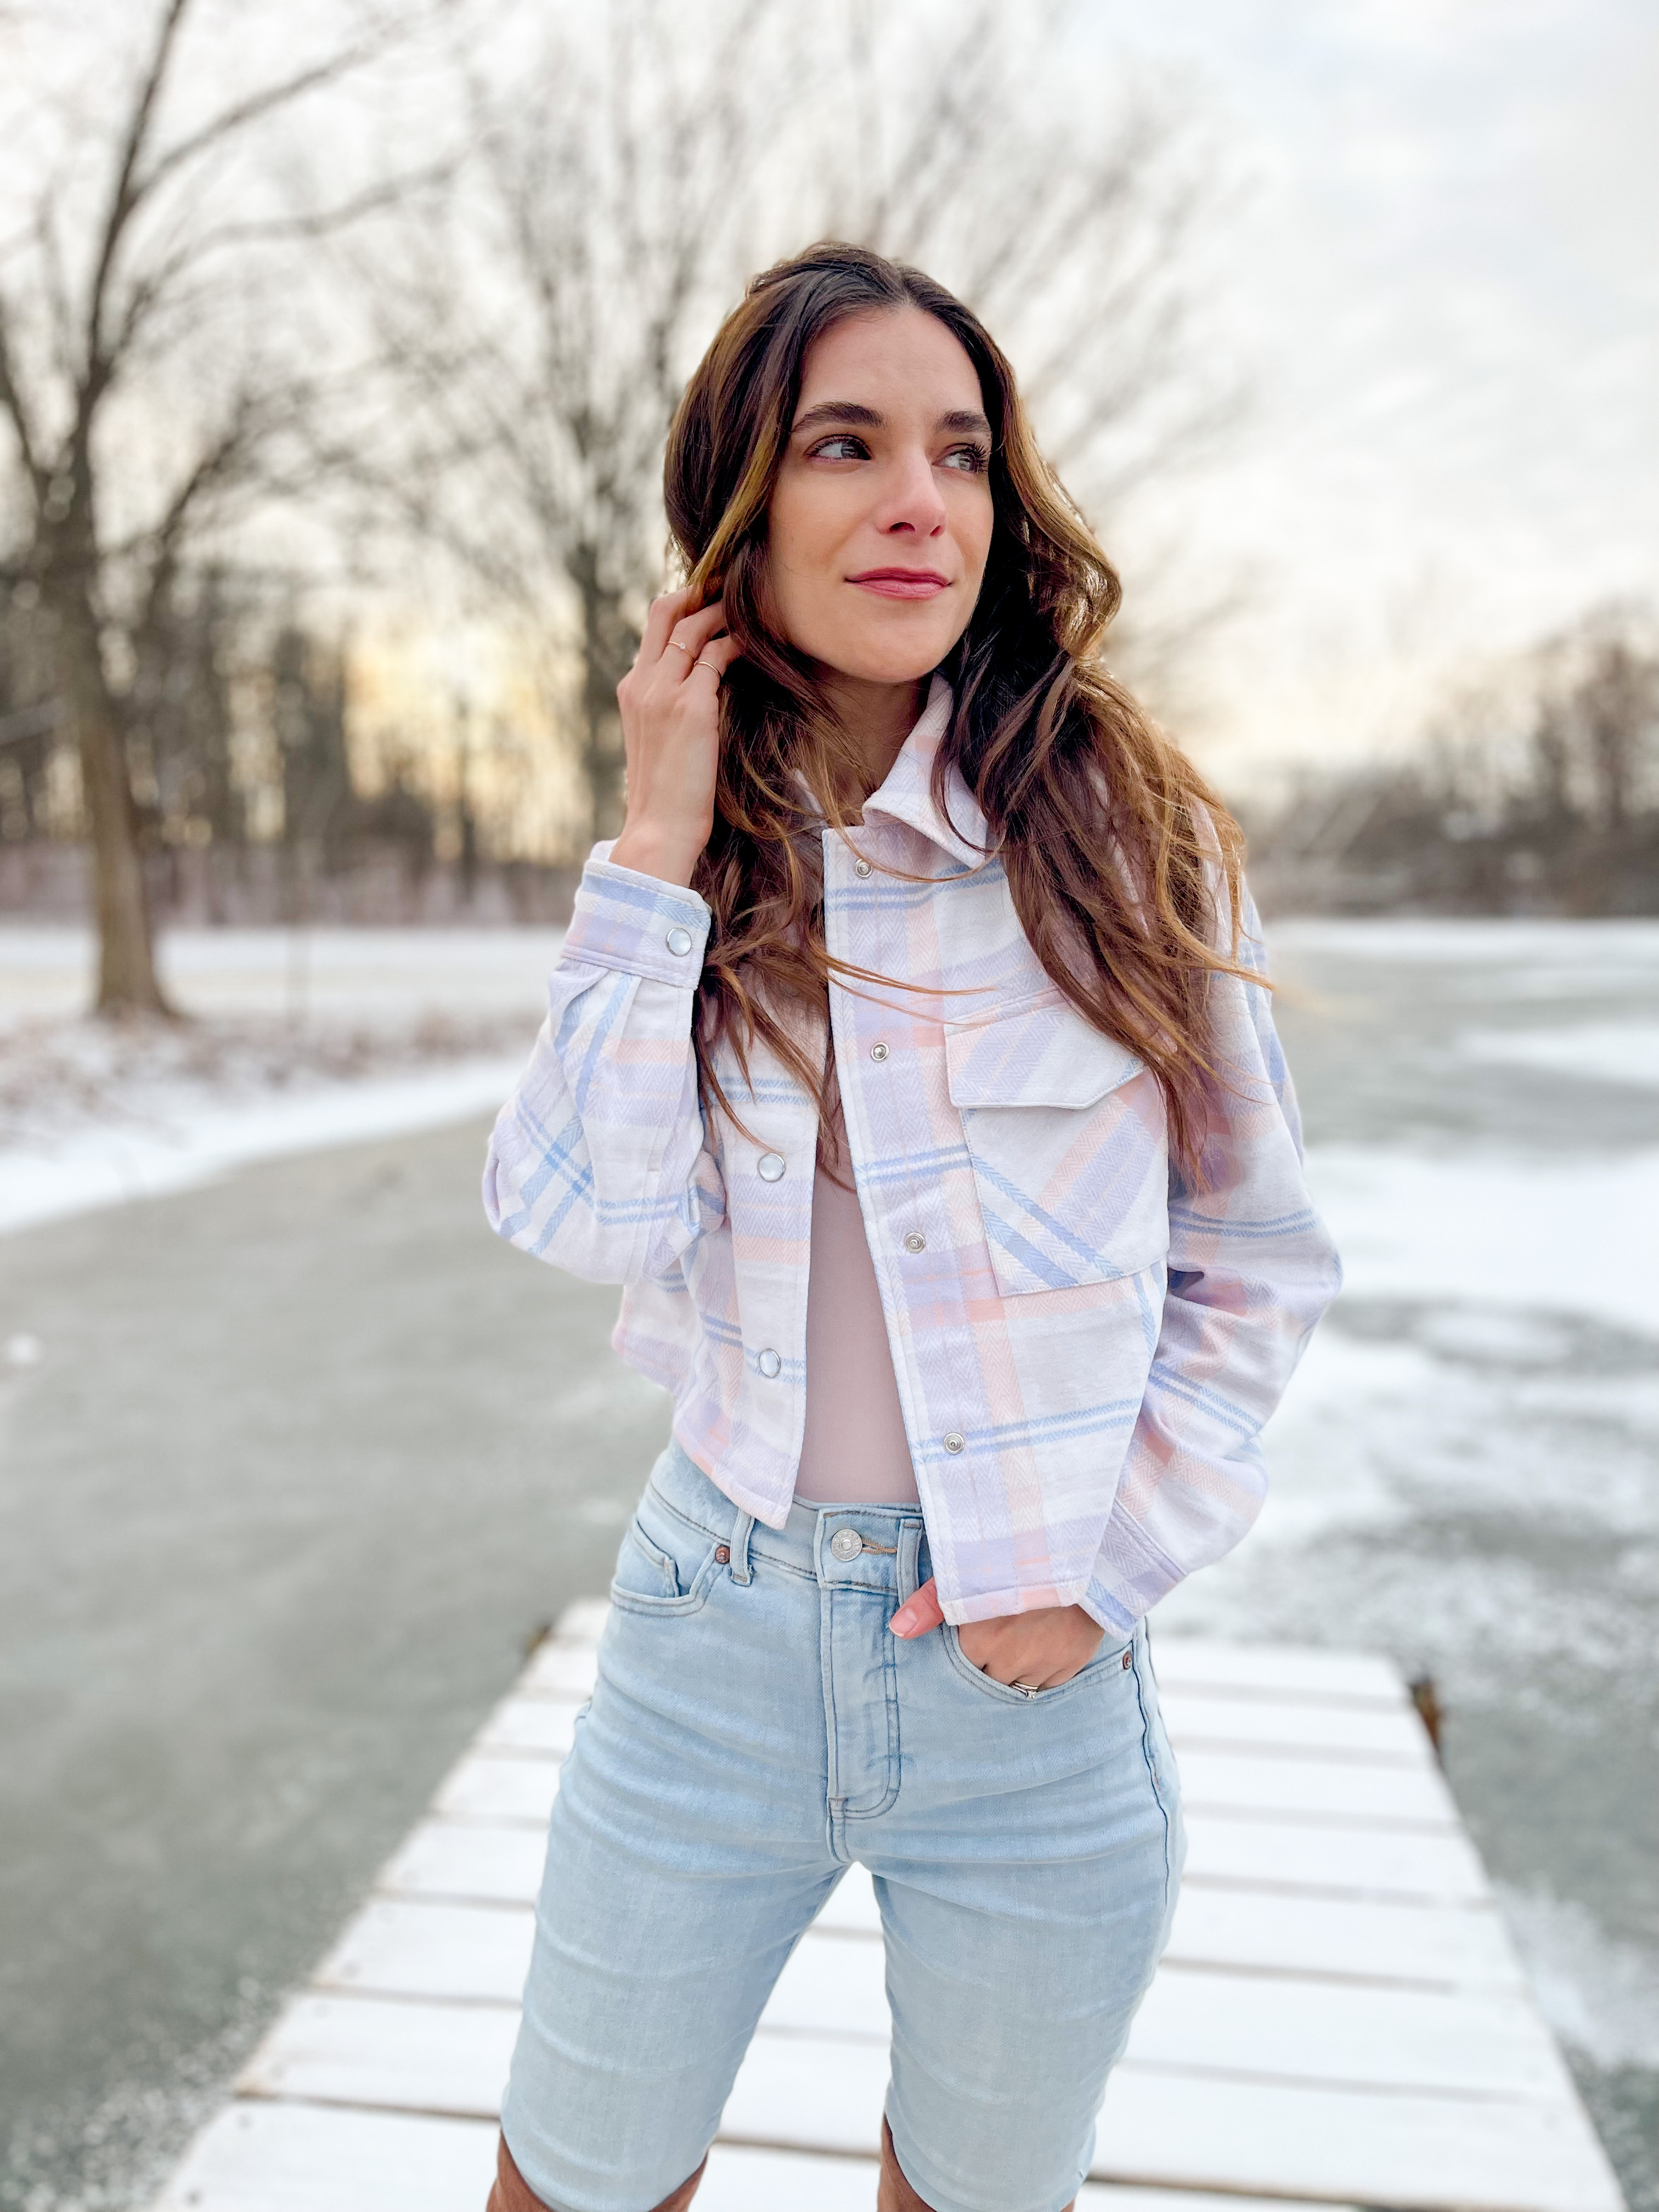 How to Wear Cropped Jeans When It's Cold